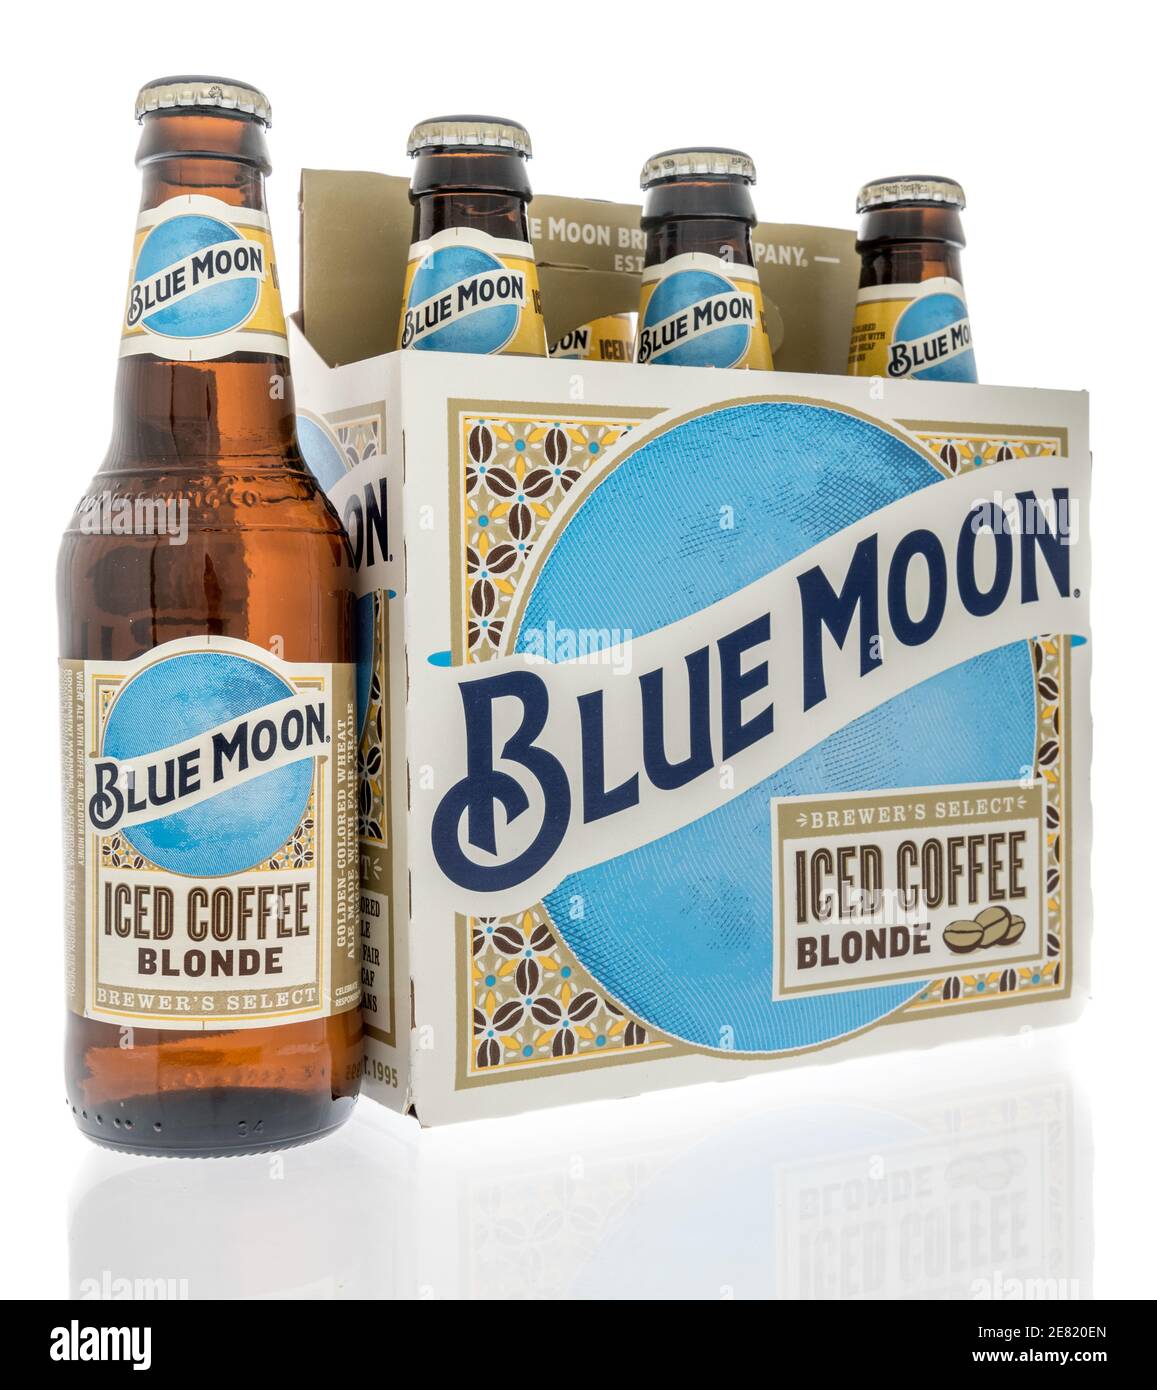 Winneconne, WI -22 January 2021: A six pack of Blue moon iced coffee blonde beer on an isolated background. Stock Photo